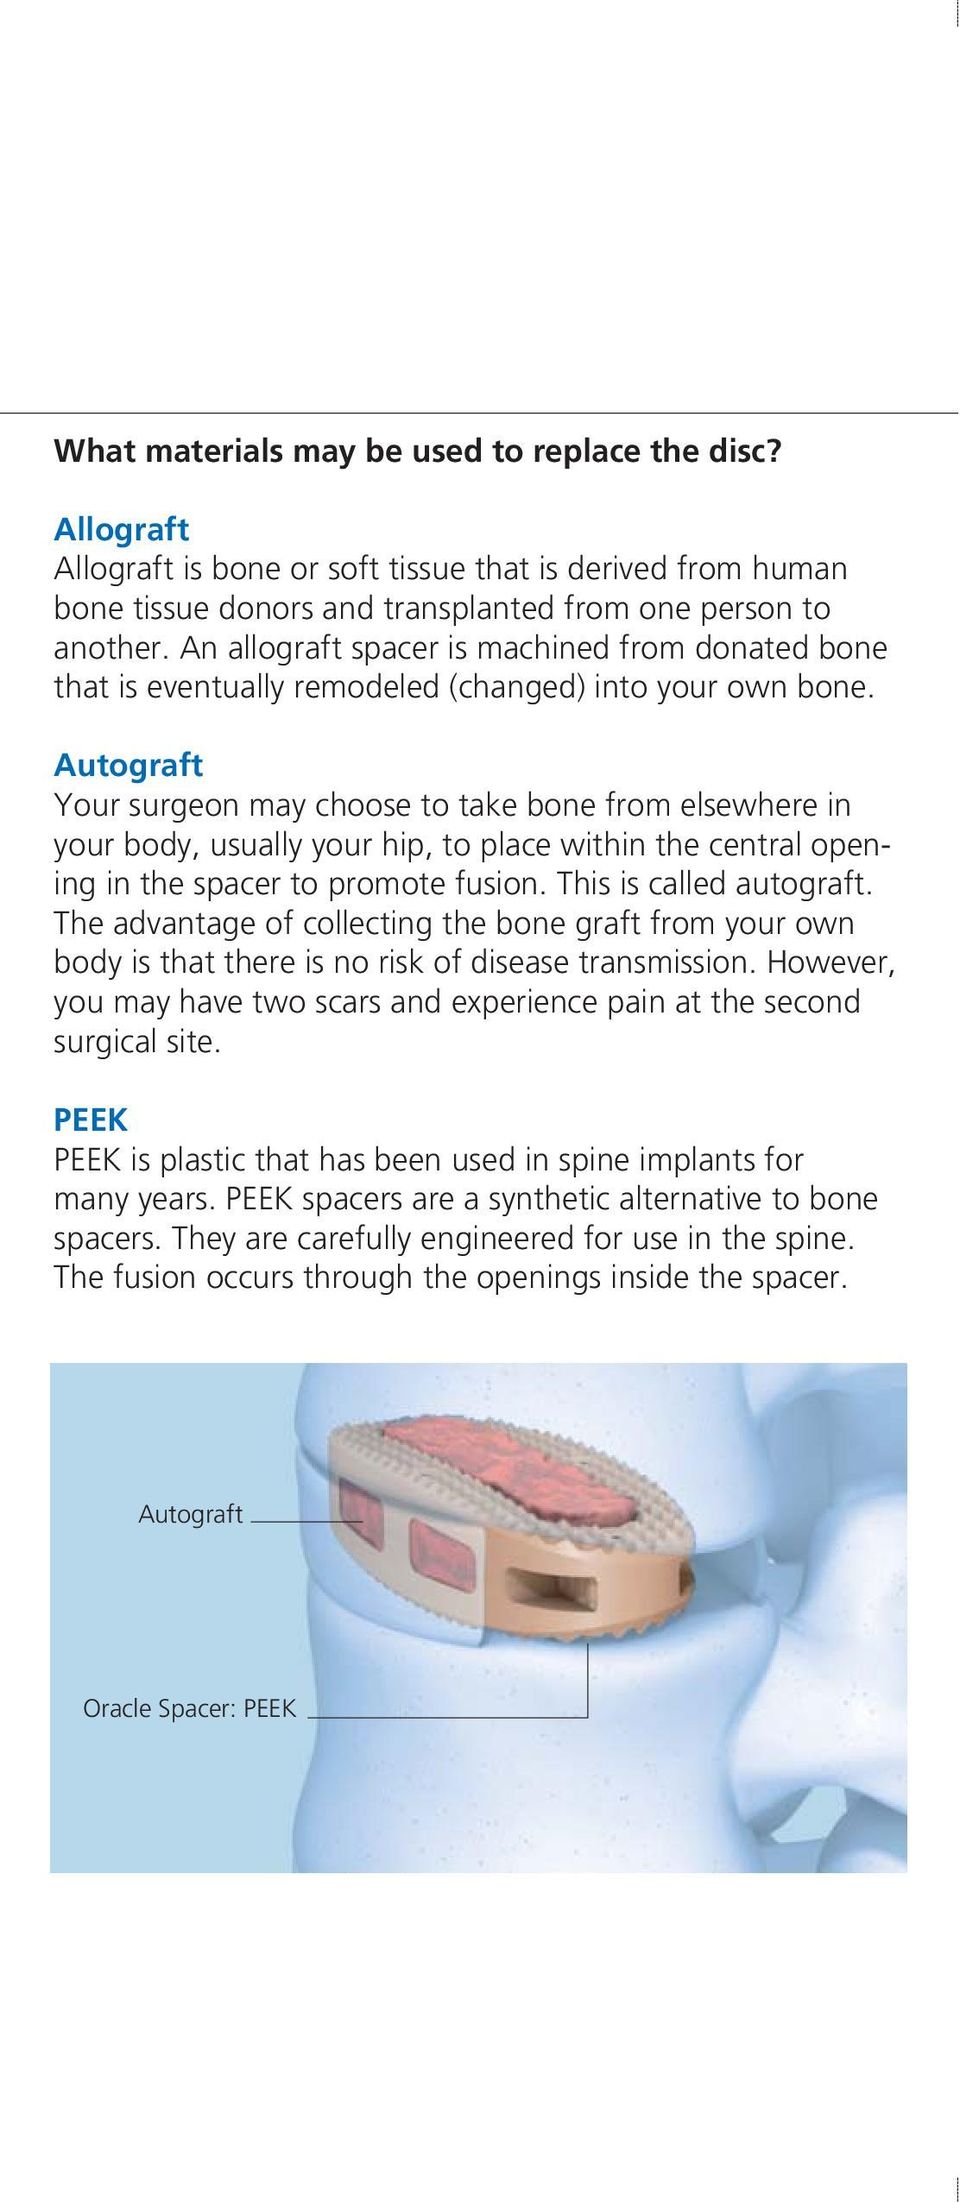 Autograft Your surgeon may choose to take bone from elsewhere in your body, usually your hip, to place within the central opening in the spacer to promote fusion. This is called autograft.